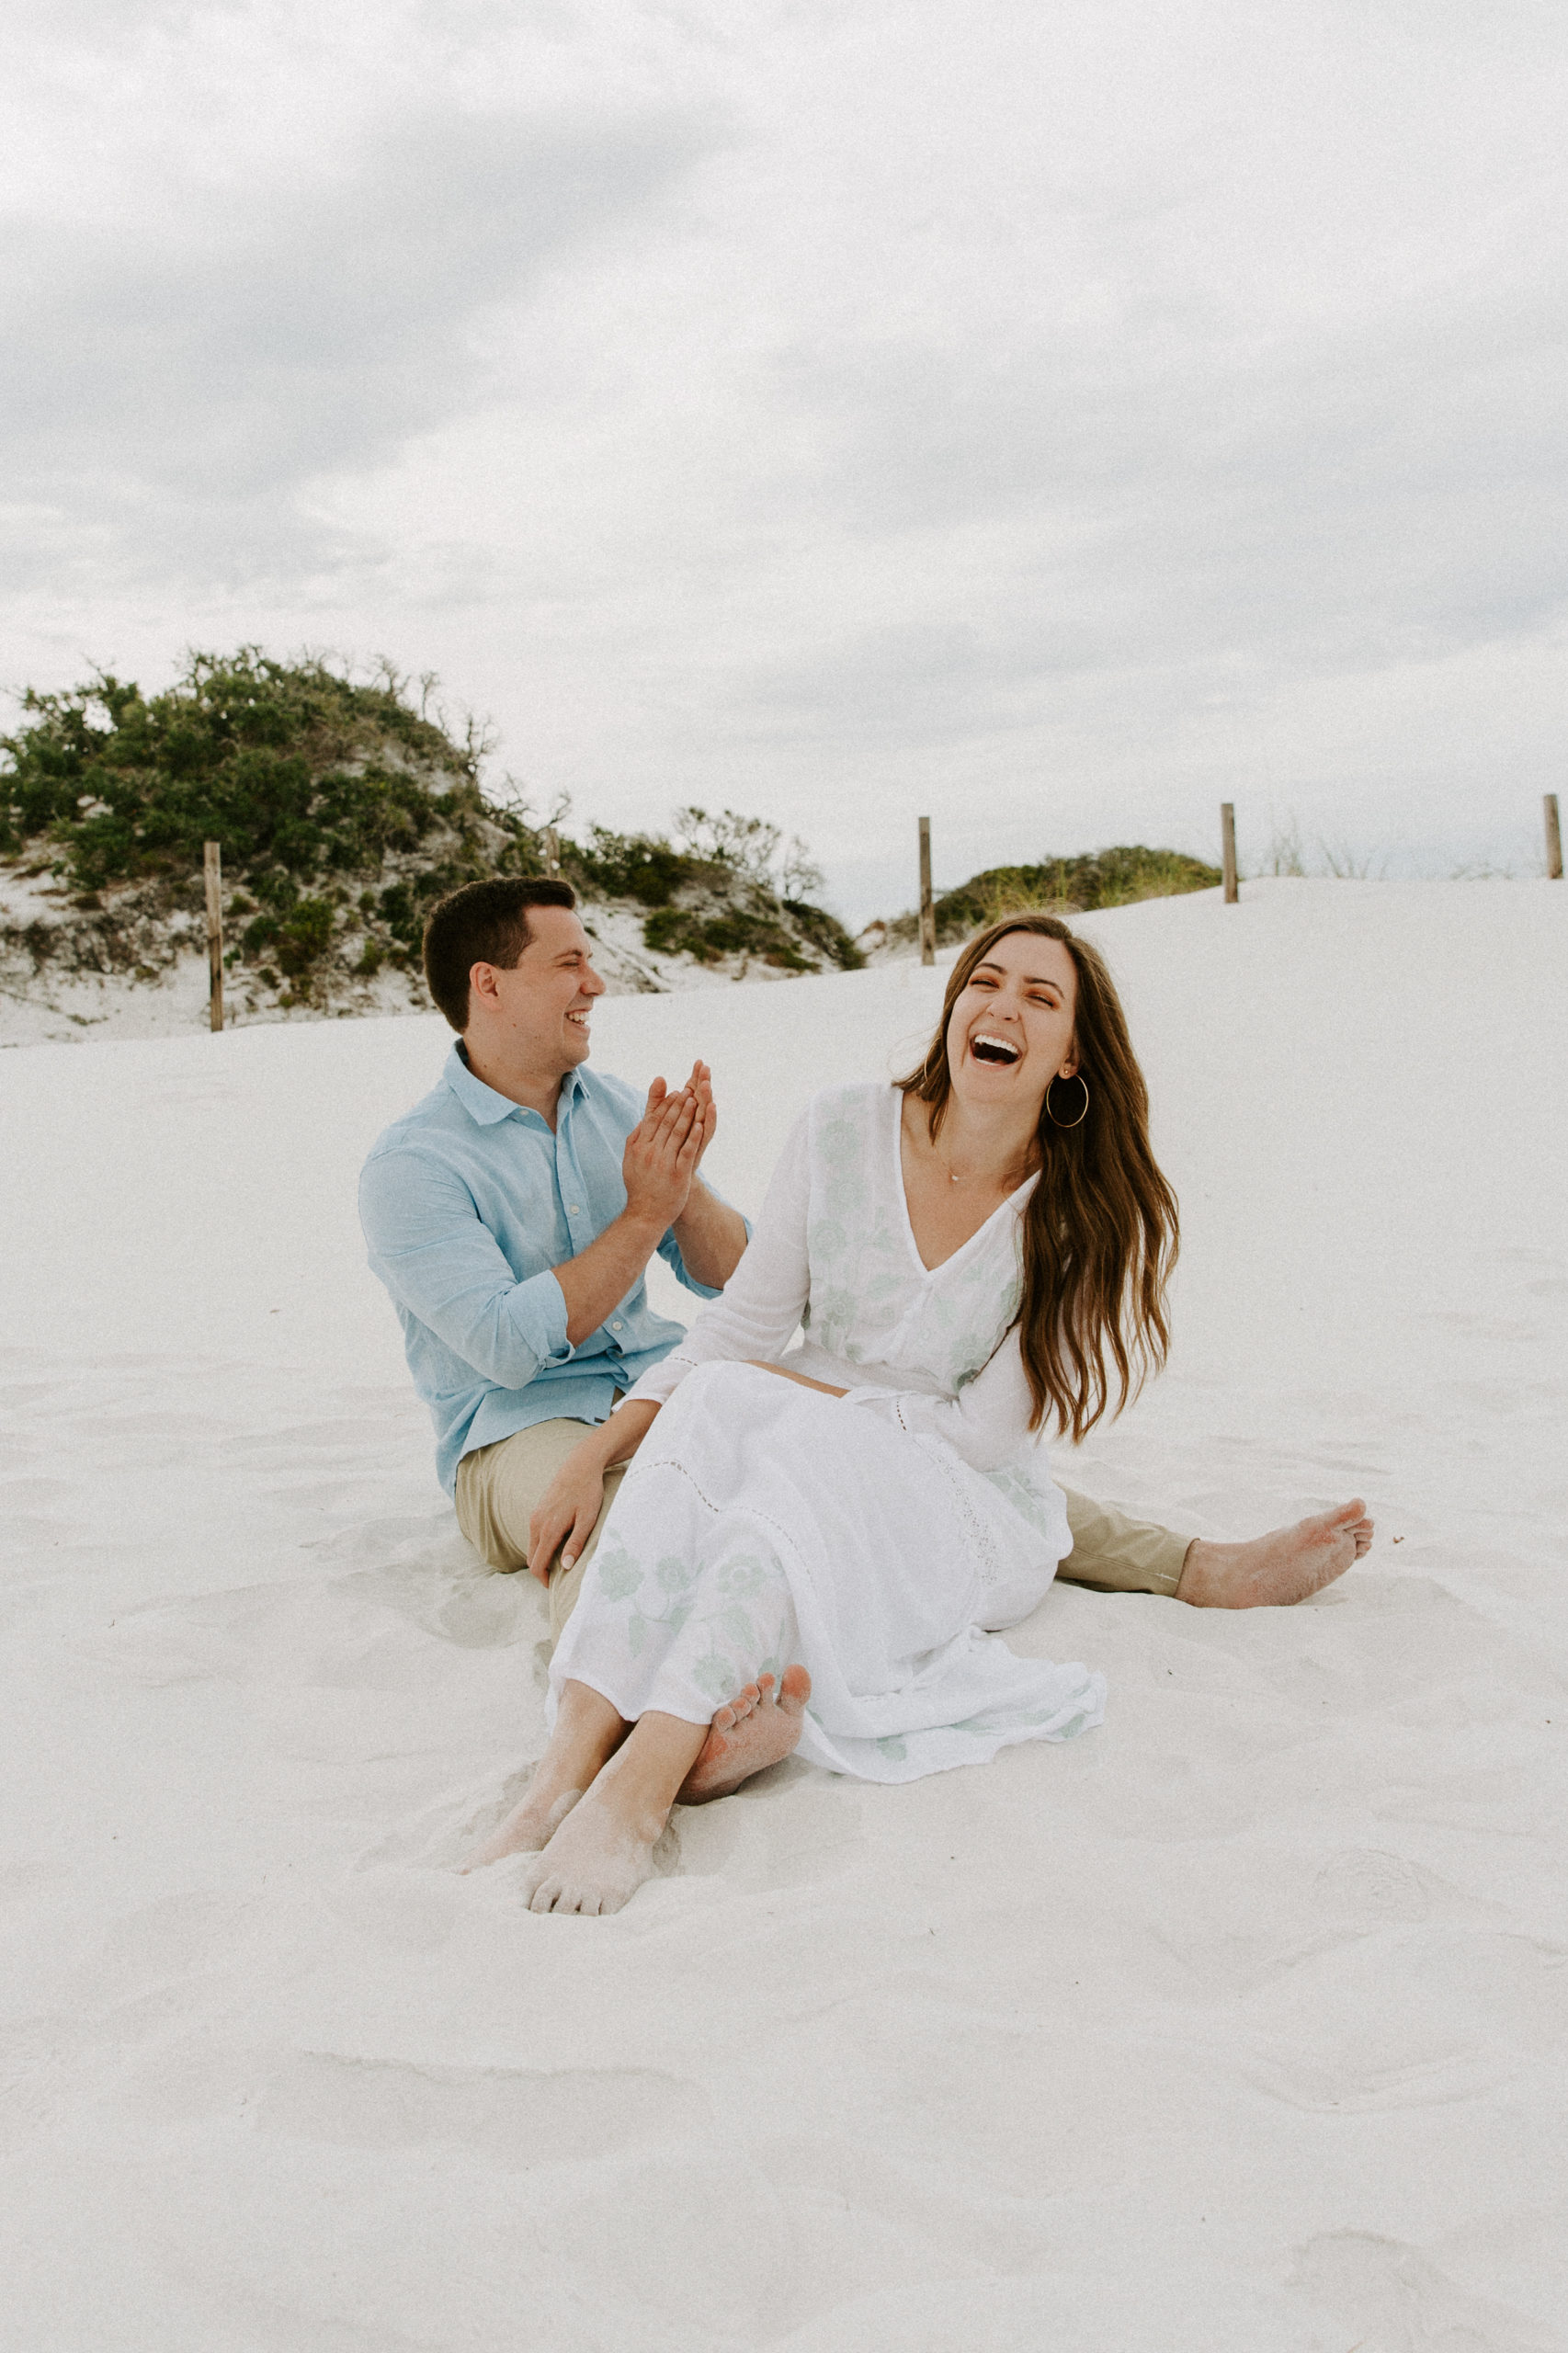 Couple sitting in the sand laughing as the man is clasping his hands together at something his partner said during their Florida engagement photos